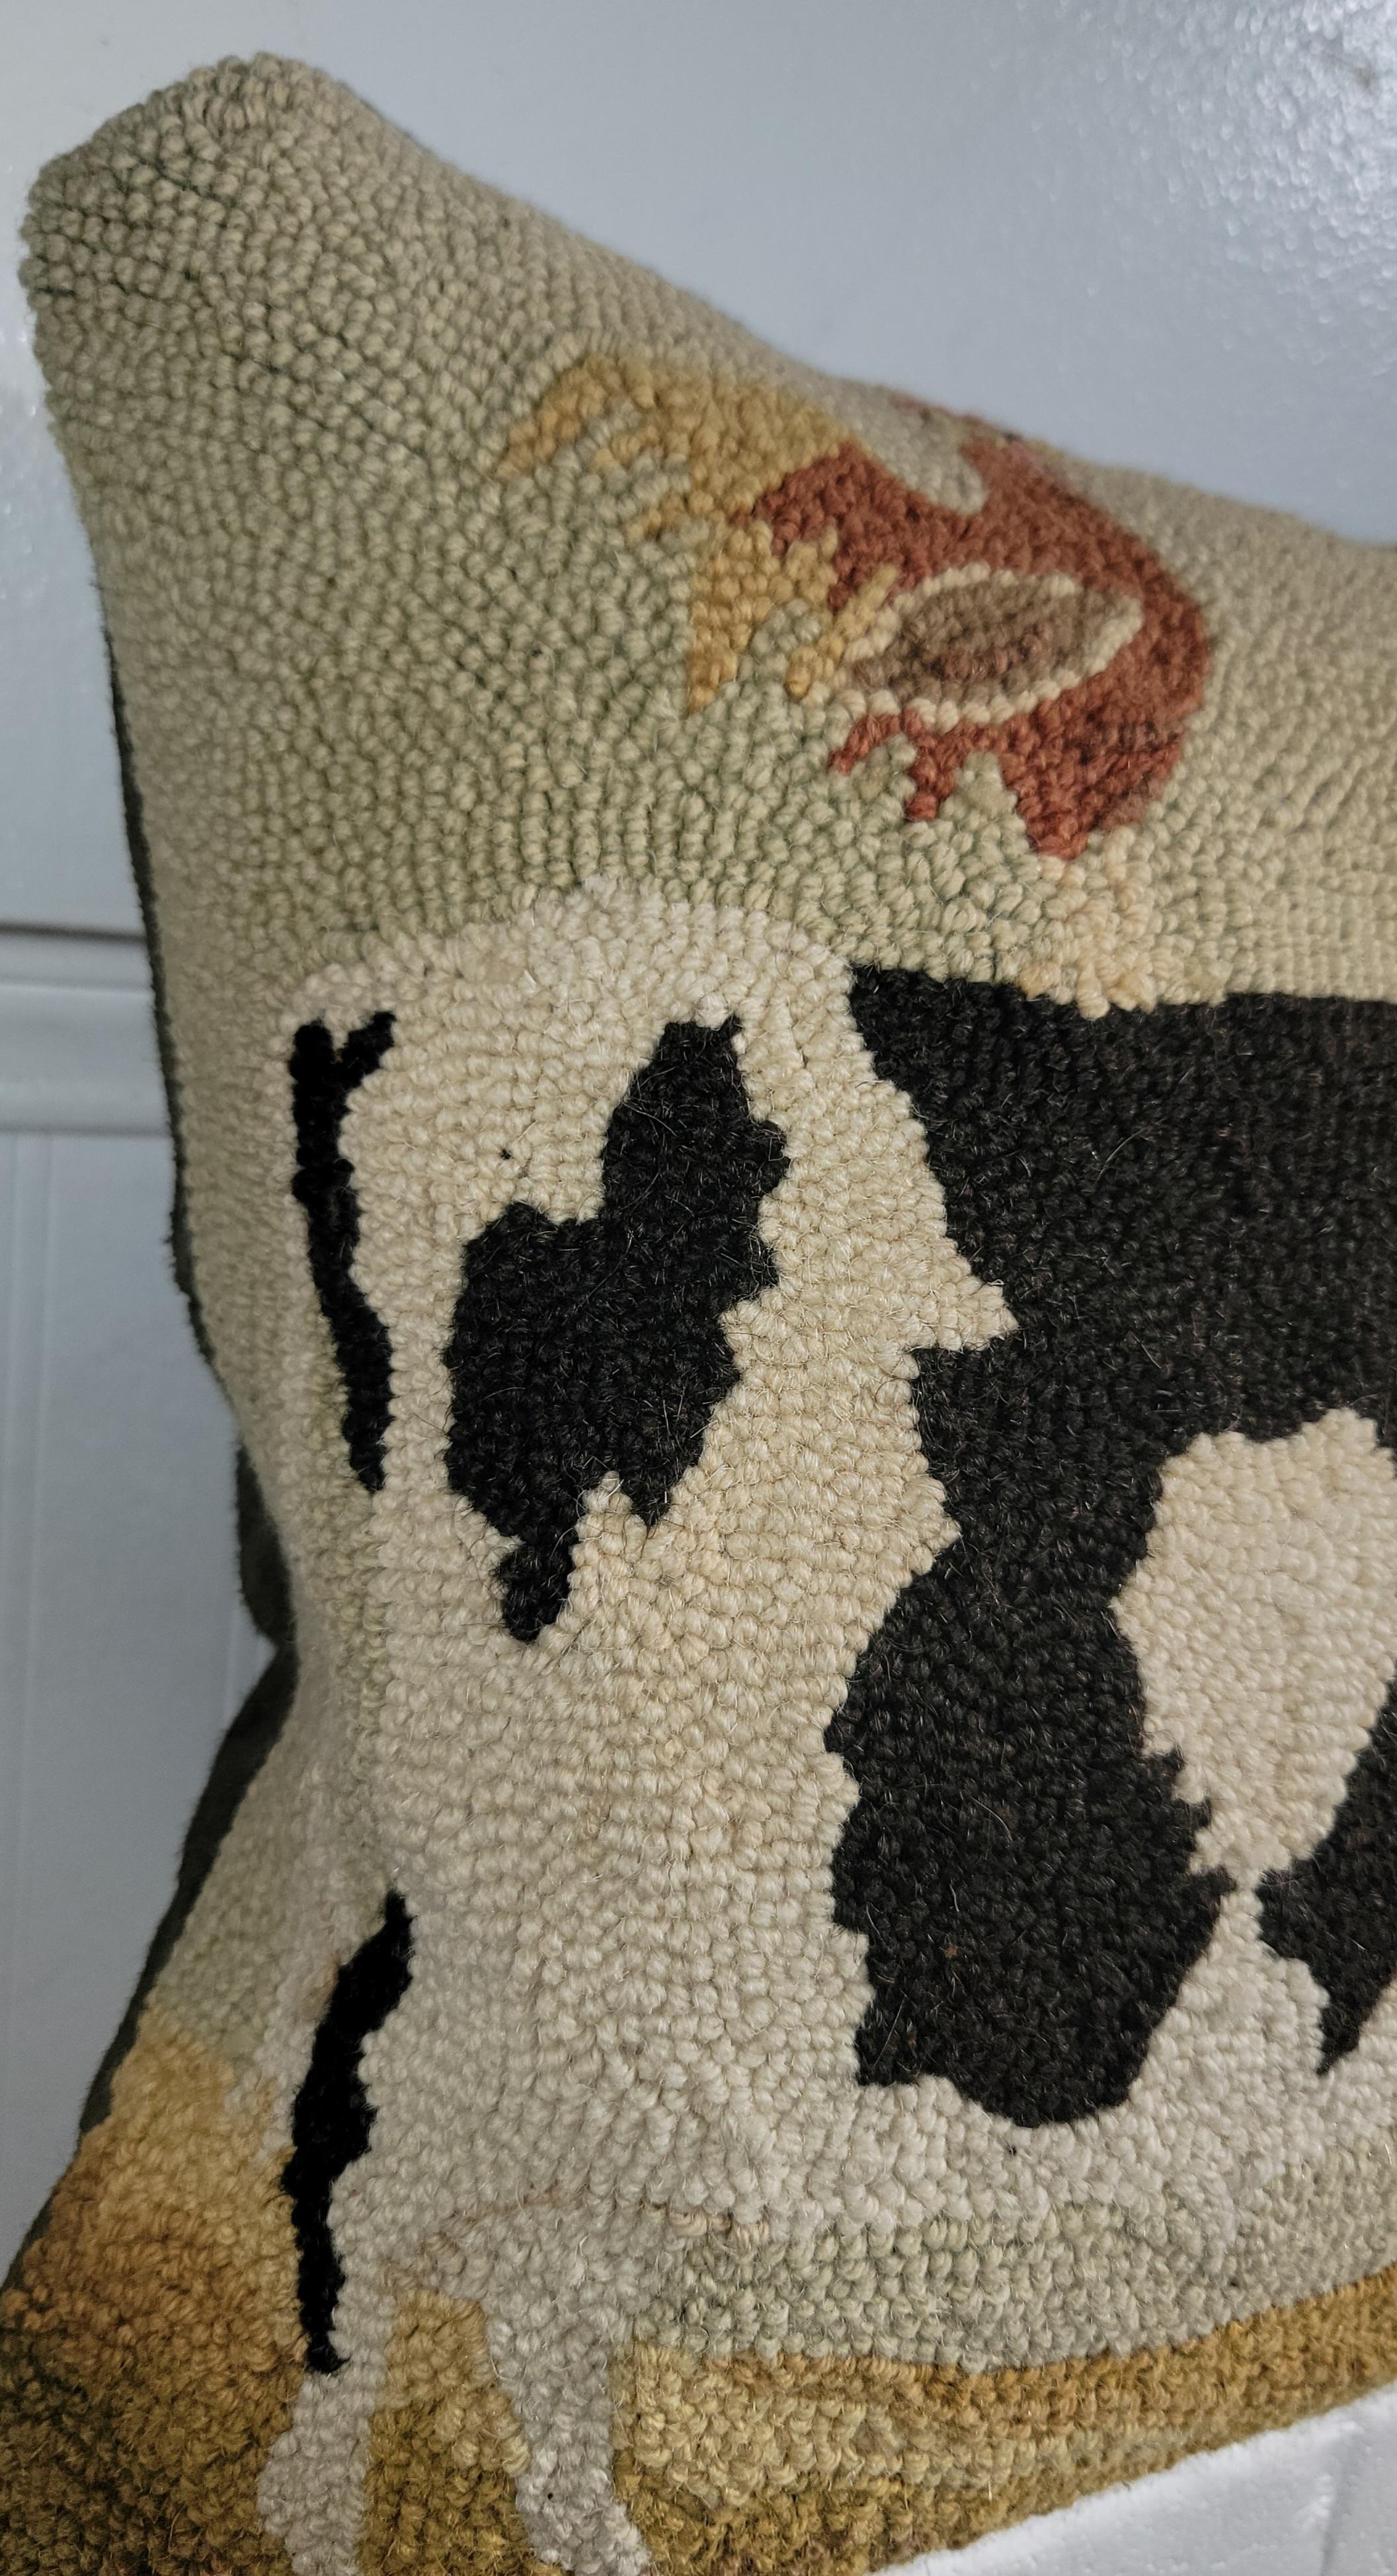 Hand hooked cow pillow with suede / leather backing.The insert is down & feather fill.